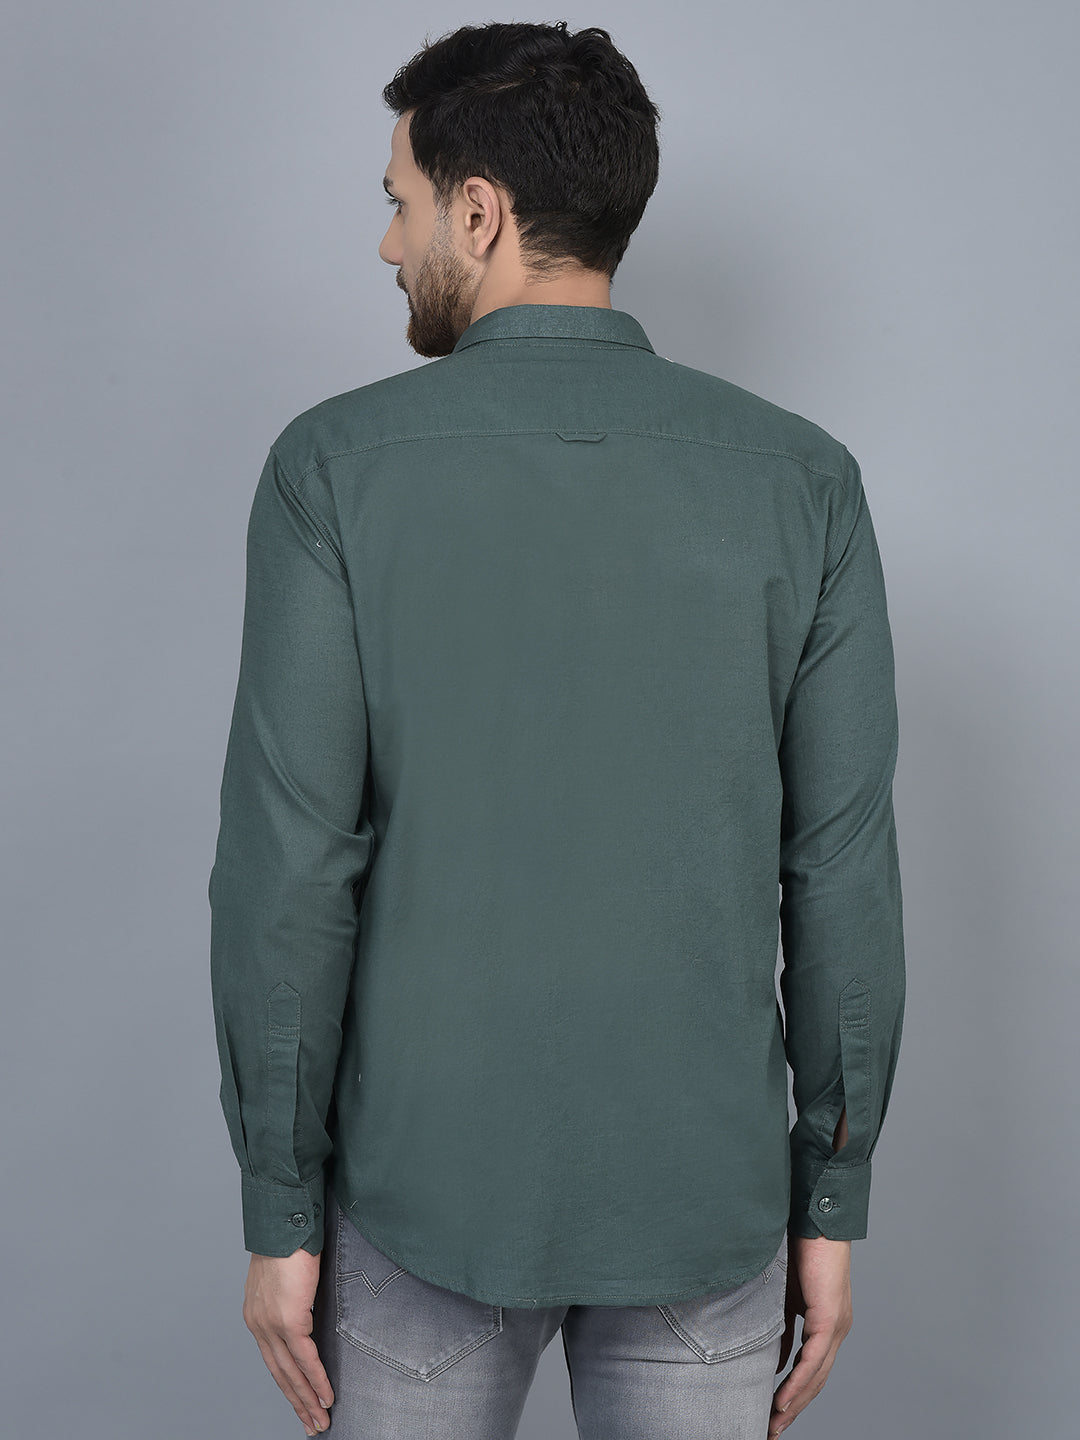 Cobb Green Solid Slim Fit Casual Shirt